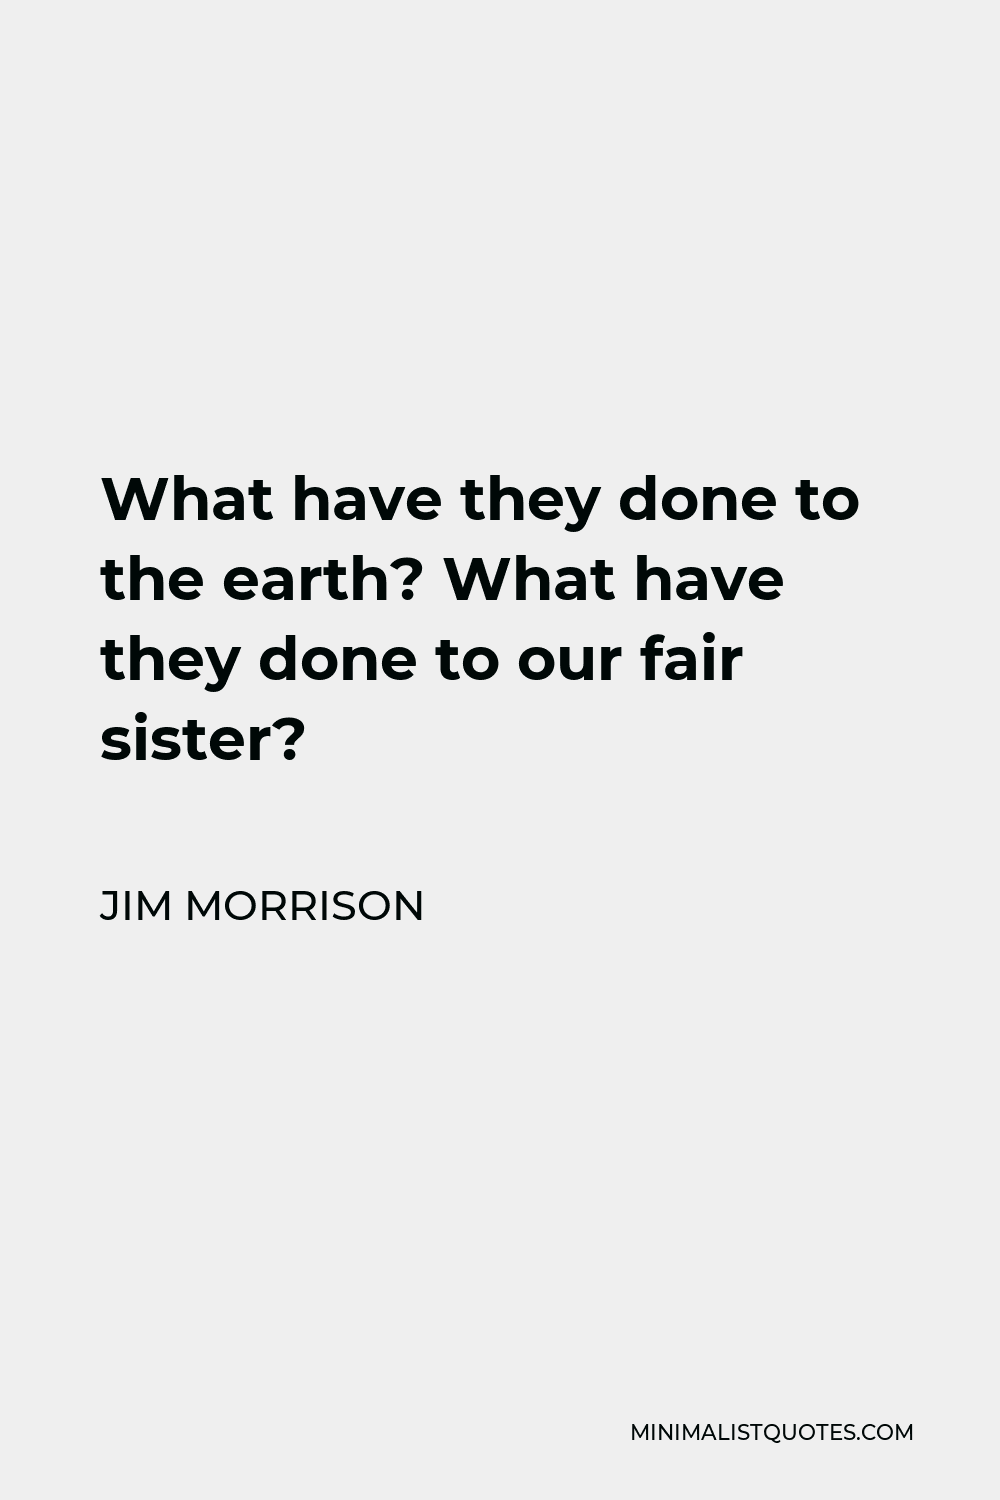 Jim Morrison Quote - What have they done to the earth? What have they done to our fair sister?